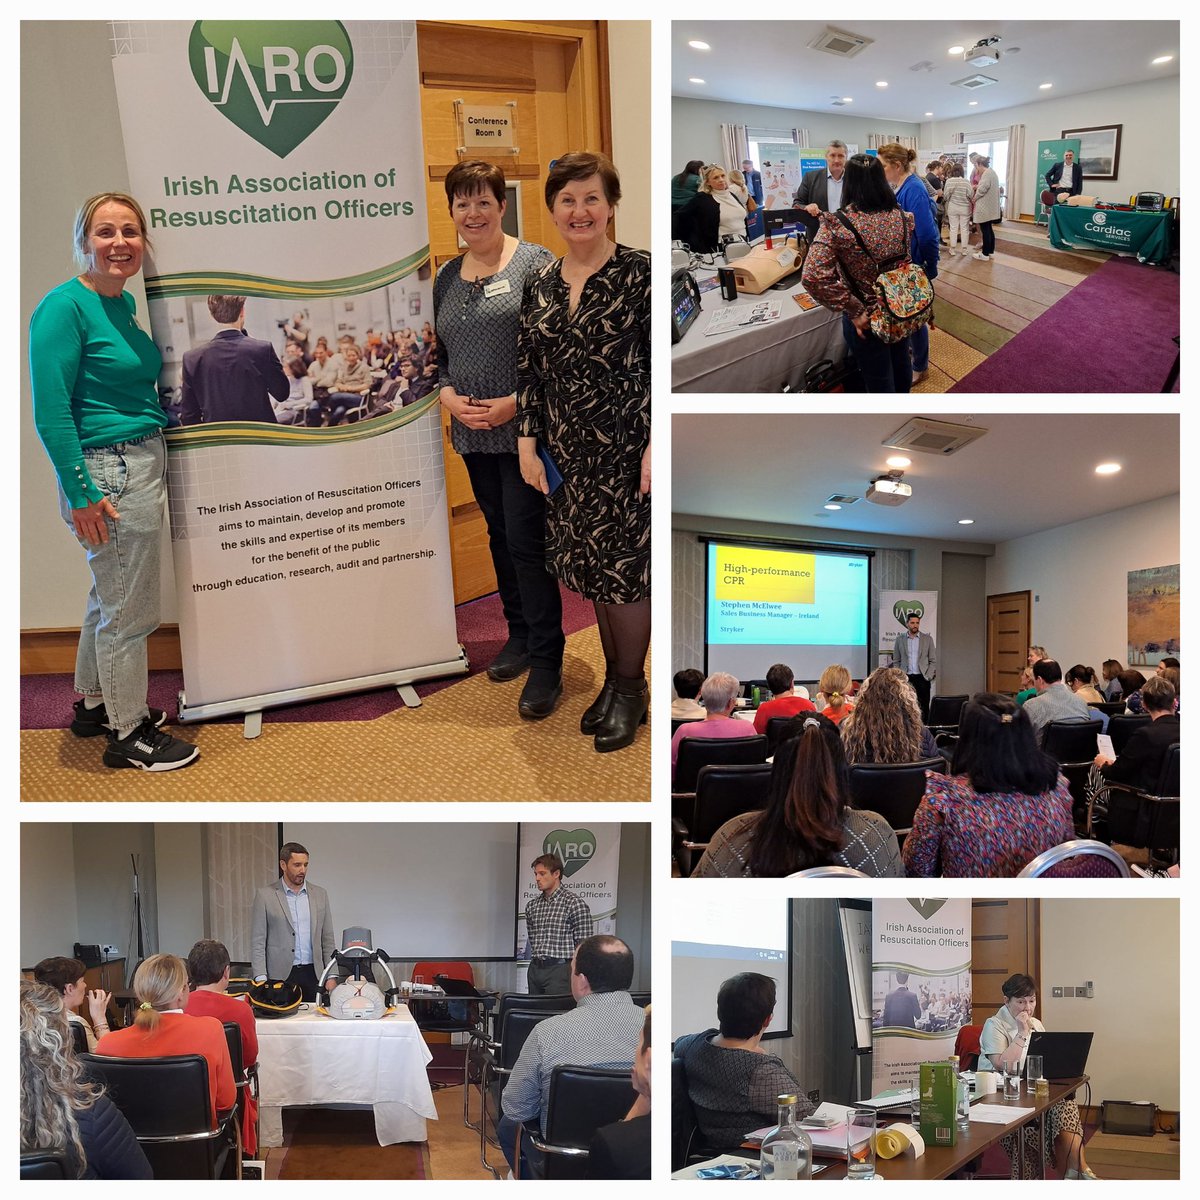 Attended the IARO meeting/Education day today in Mullingar. Excellent networking and learning as always. Excellent presentations from colleagues on NCAA pilot (In-Hosp arrests) and Paed Resus . Rosemarie presented on our DNACPR journey to date, including audit results. #IARO